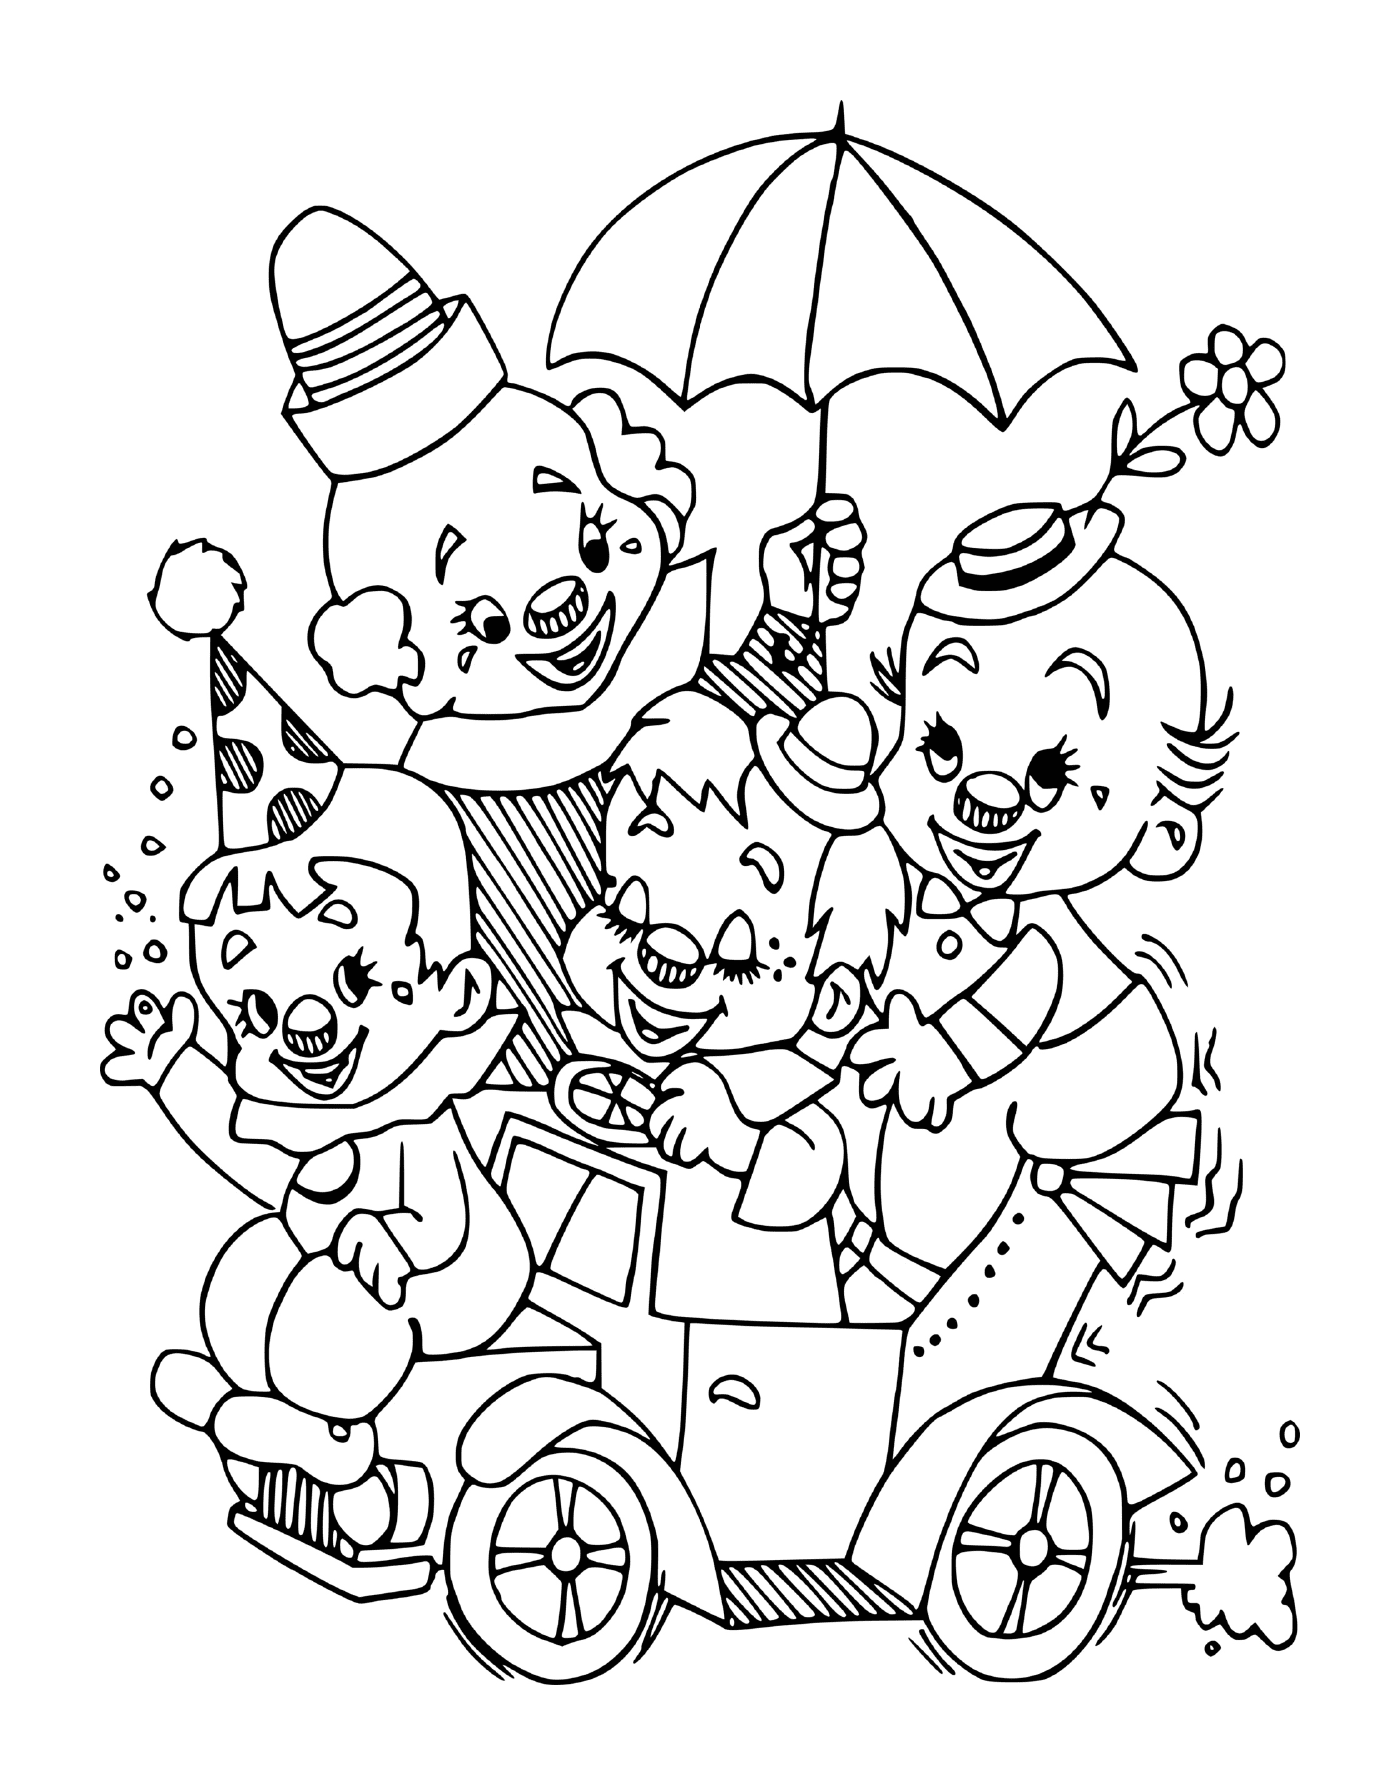  Family of small clowns sitting on a party vehicle 